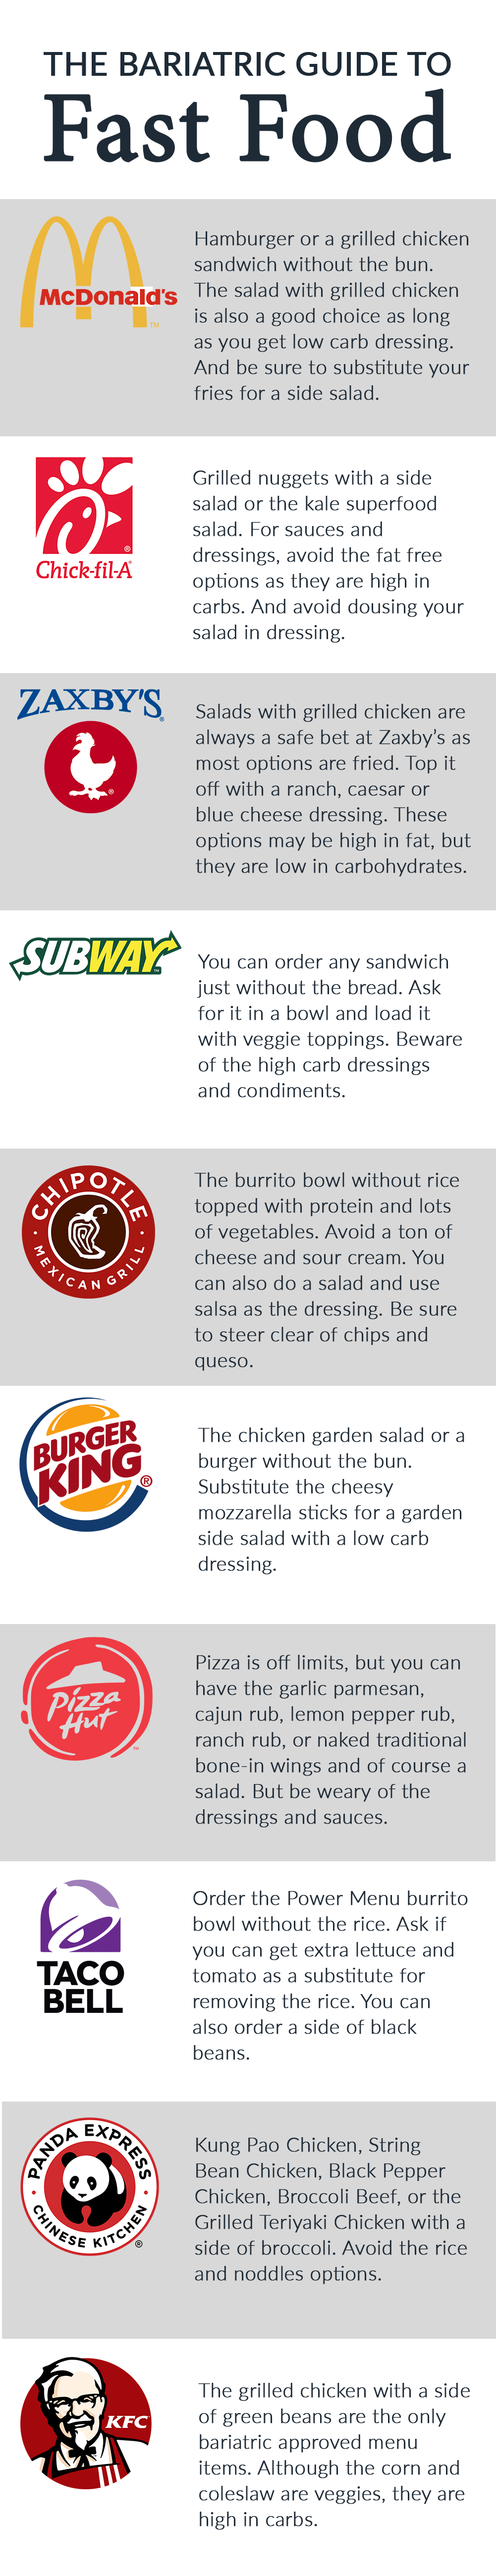 guide to eating fast food